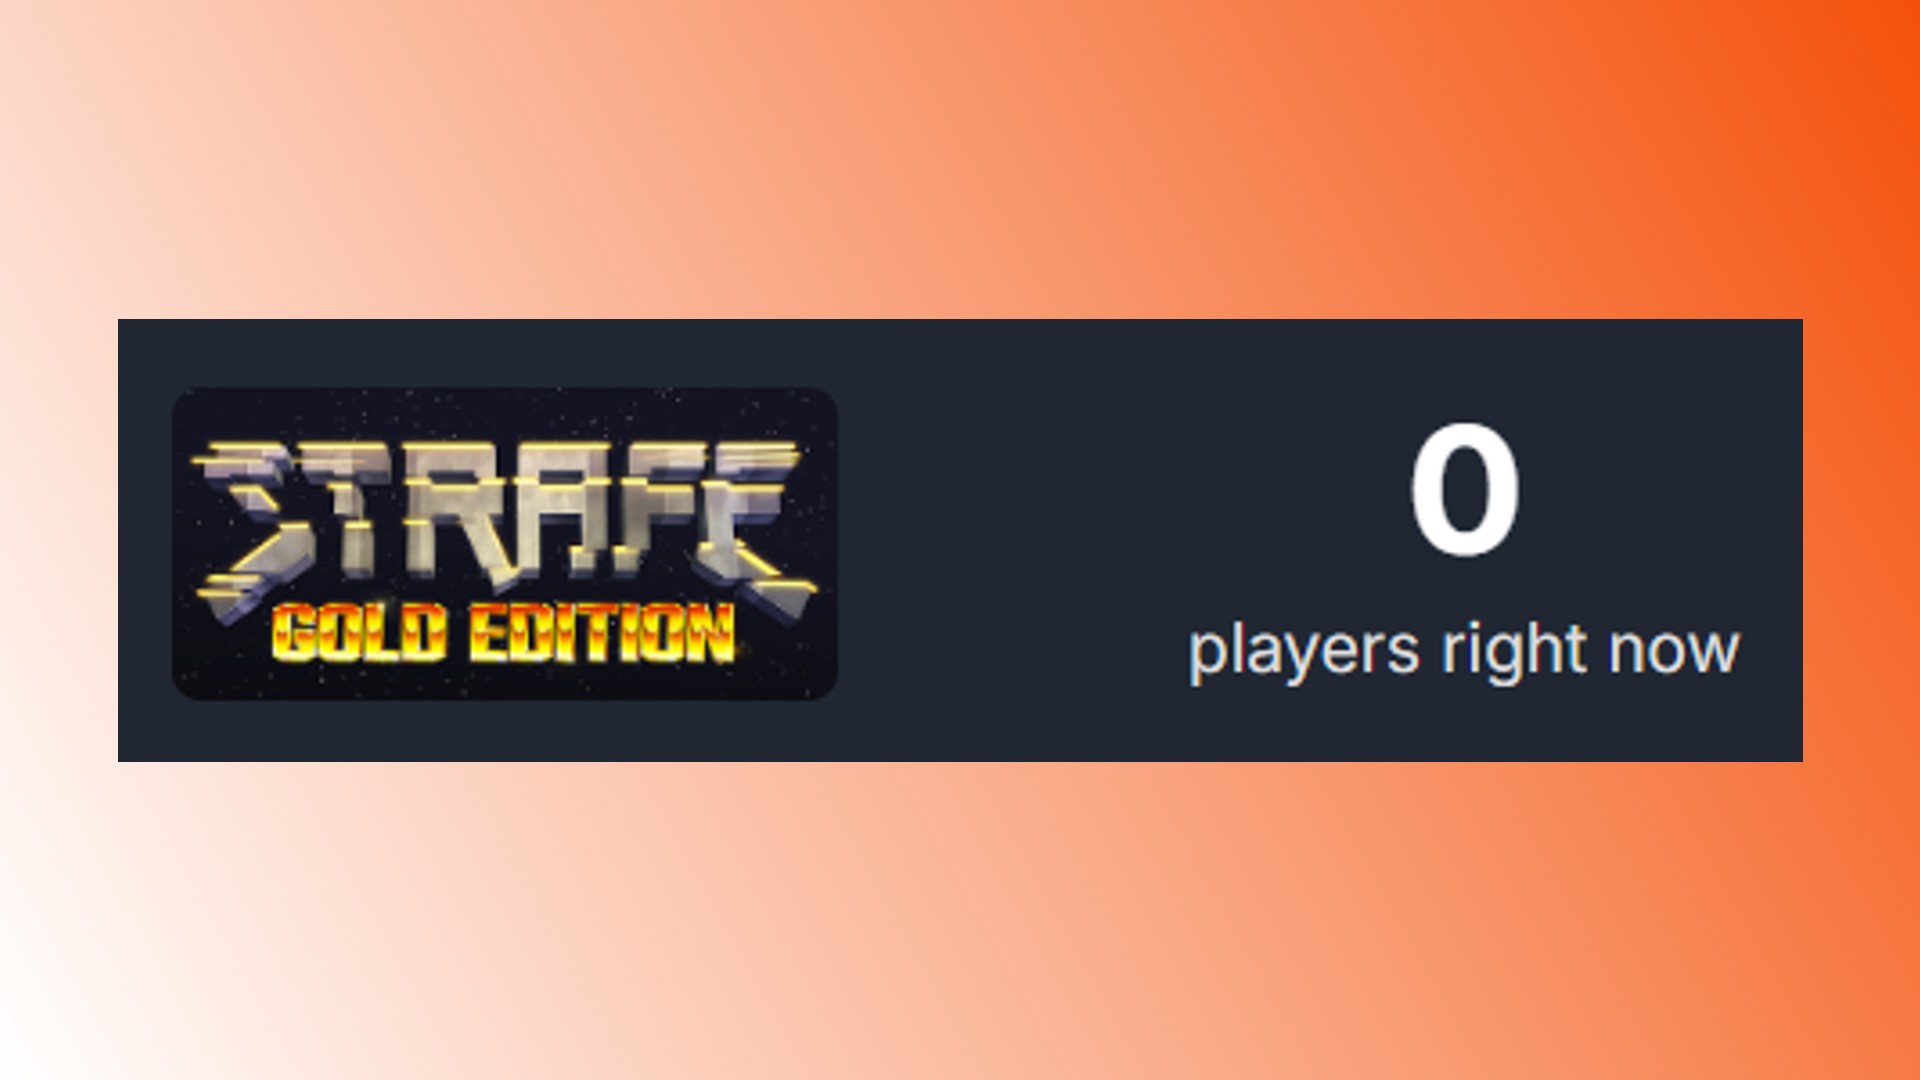 Best Steam games: The Strafe Steam player count, from the FPS game